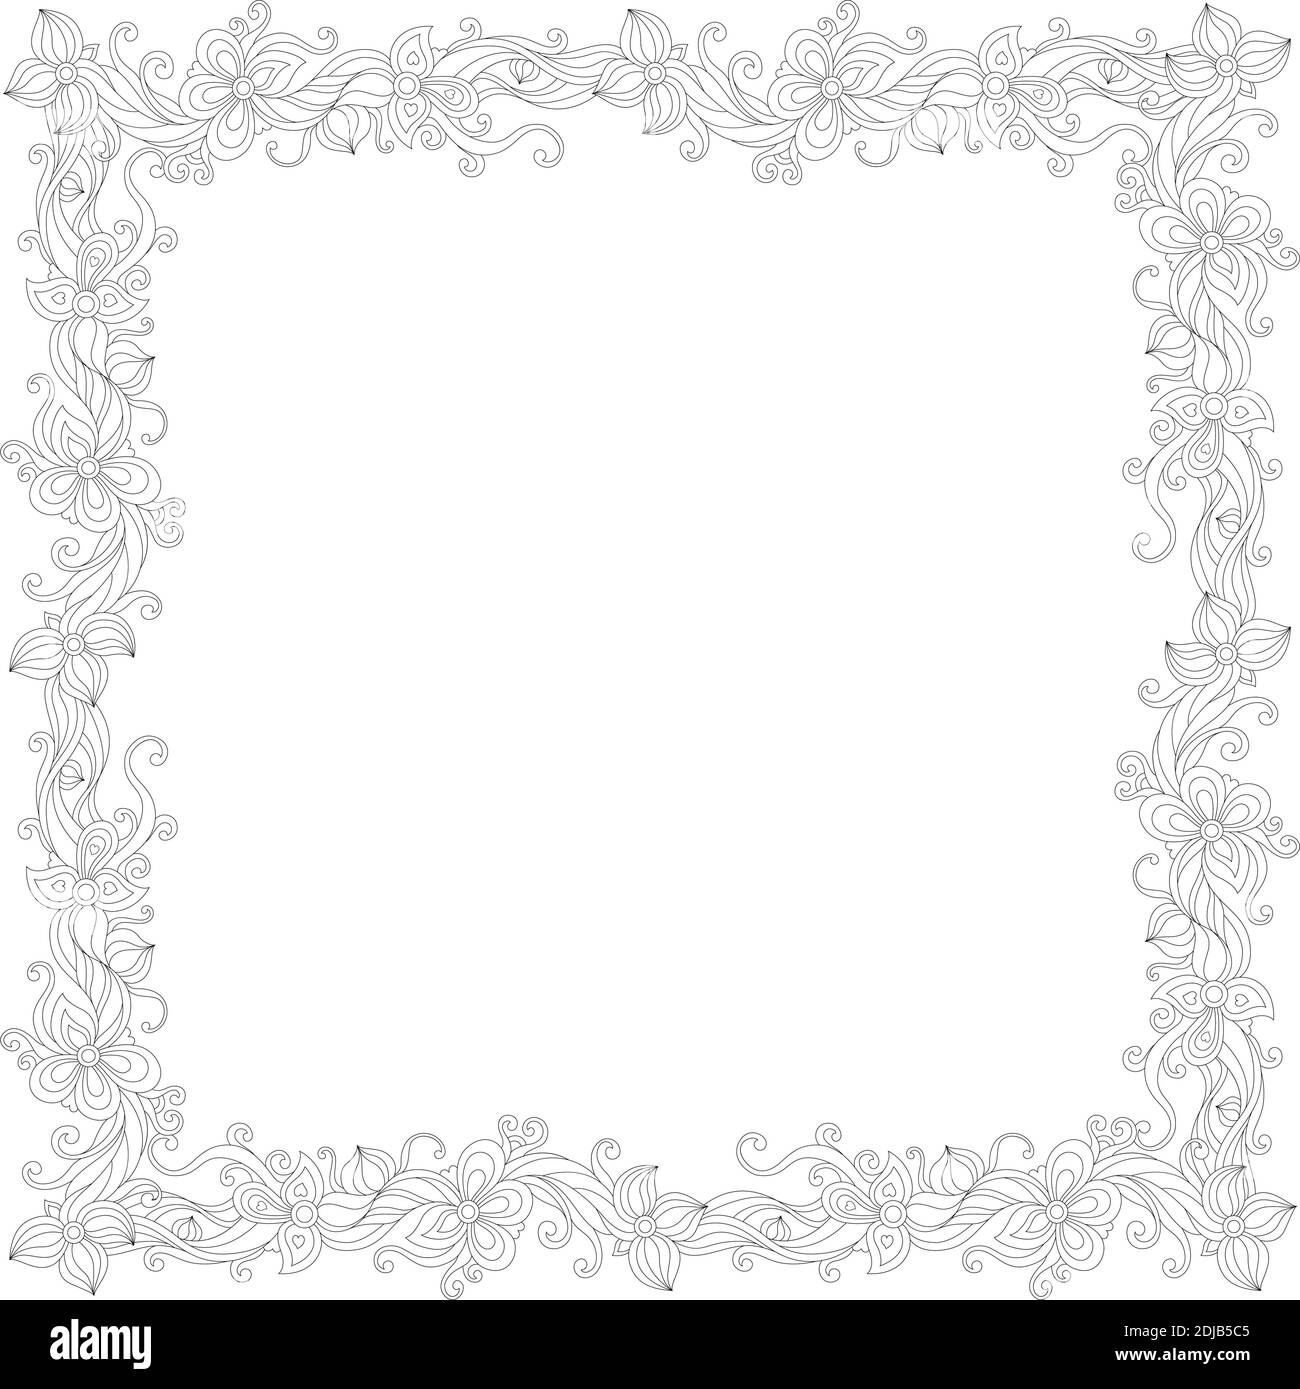 black and white square floral frame on a white background. Stock Vector